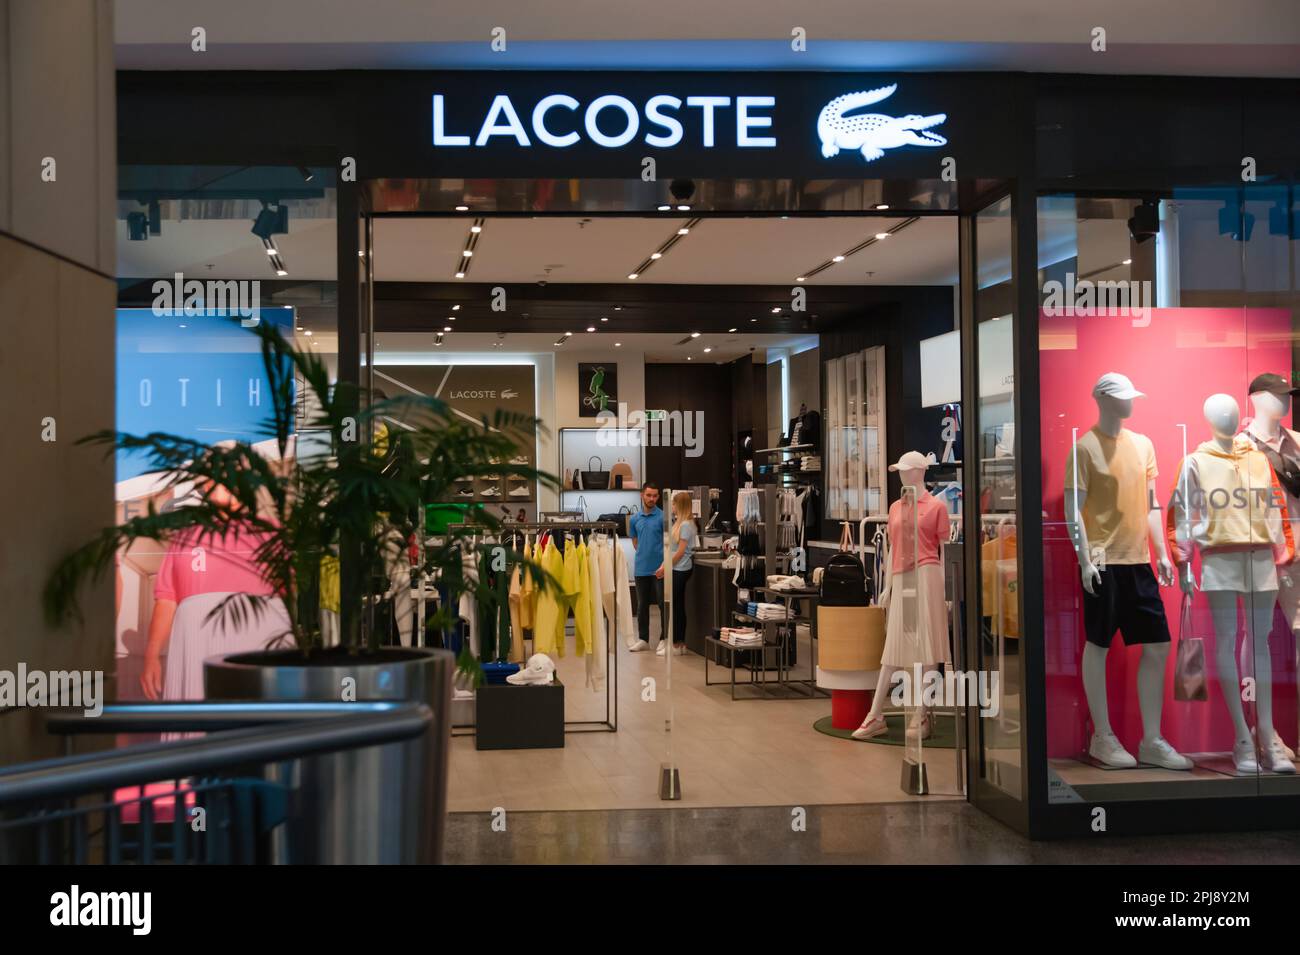 Warshaw, - May 14, Lacoste store in shopping mall Stock Photo - Alamy